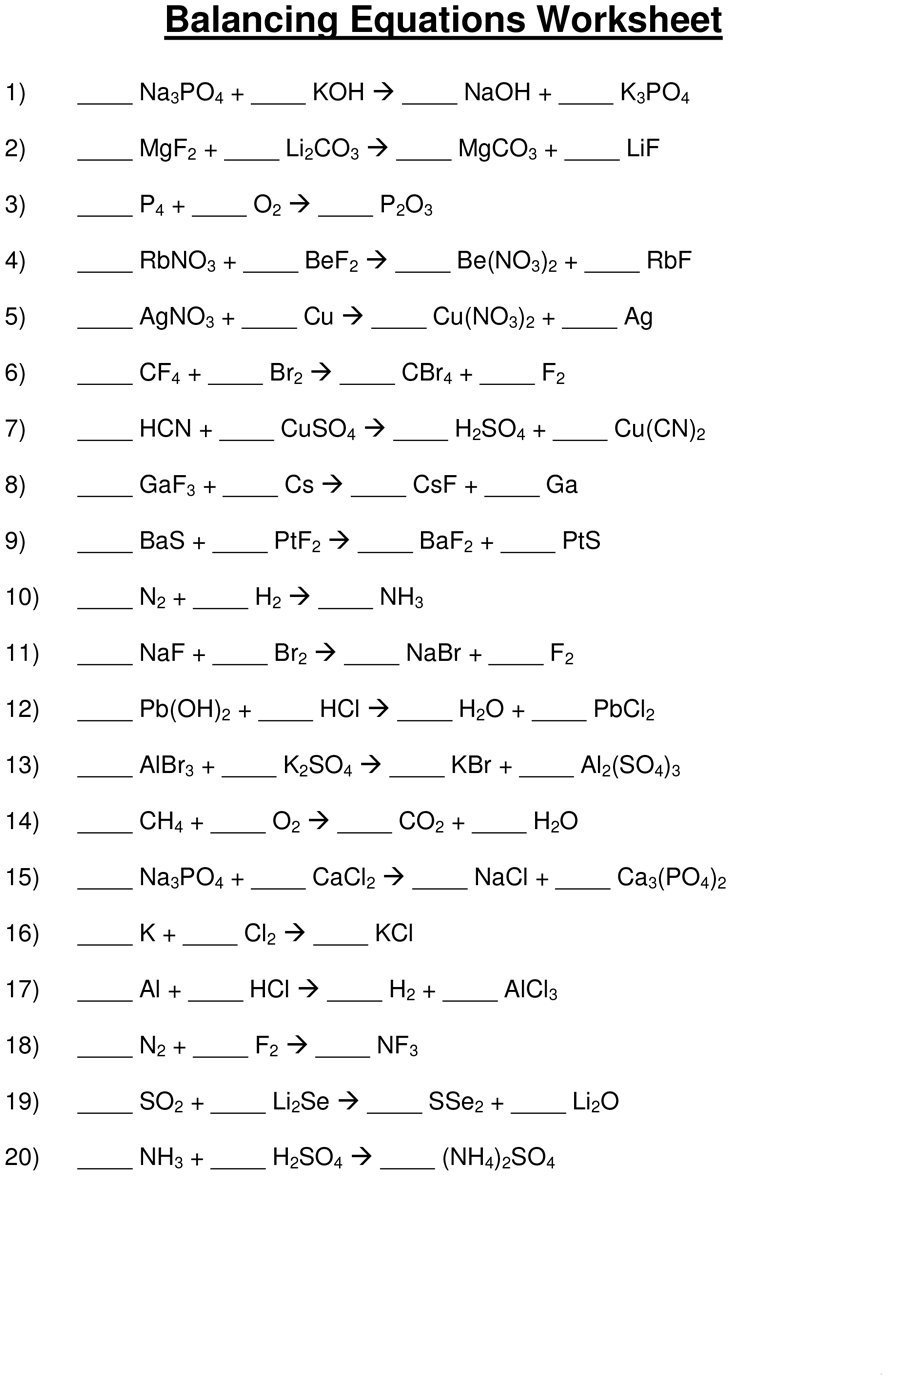 49 Balancing Chemical Equations Worksheets With Answers Regarding Balancing Equations Worksheet